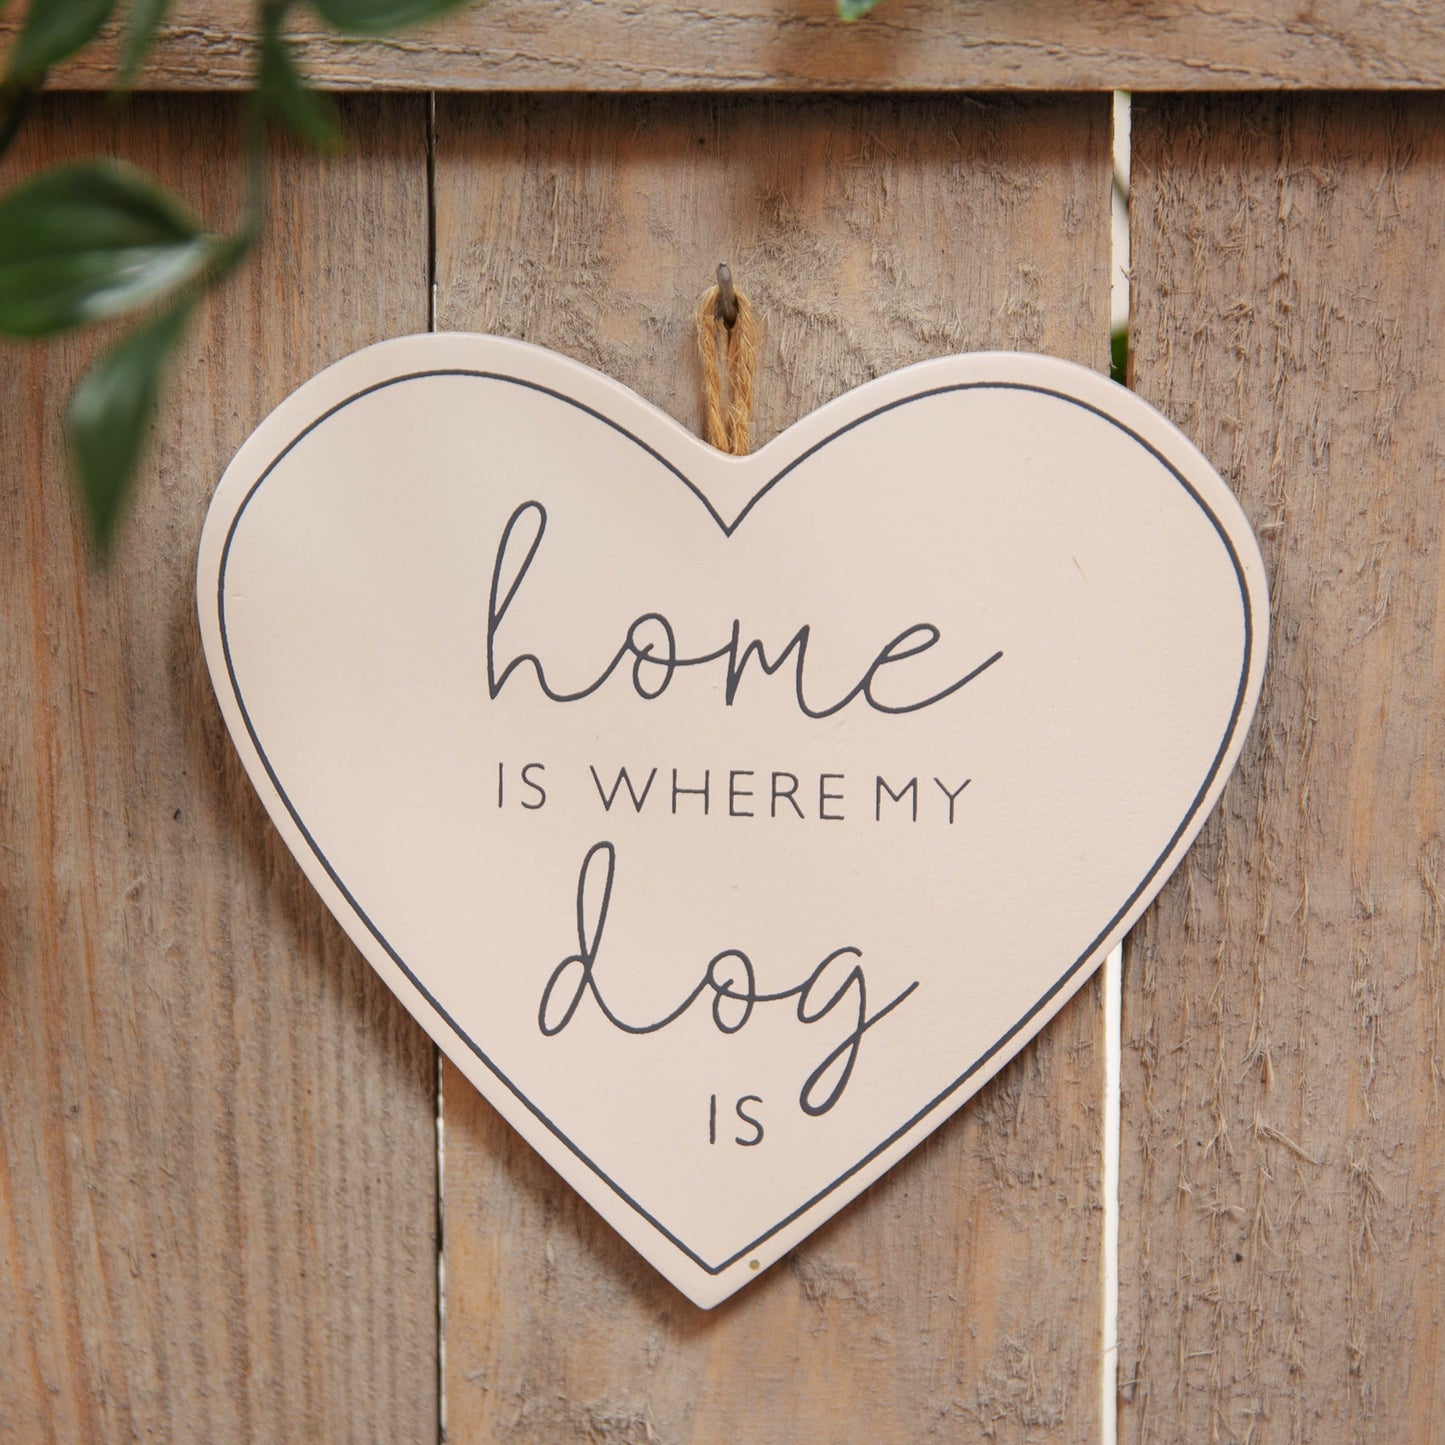 Wooden Heart Shaped Dog Hanging Plaque